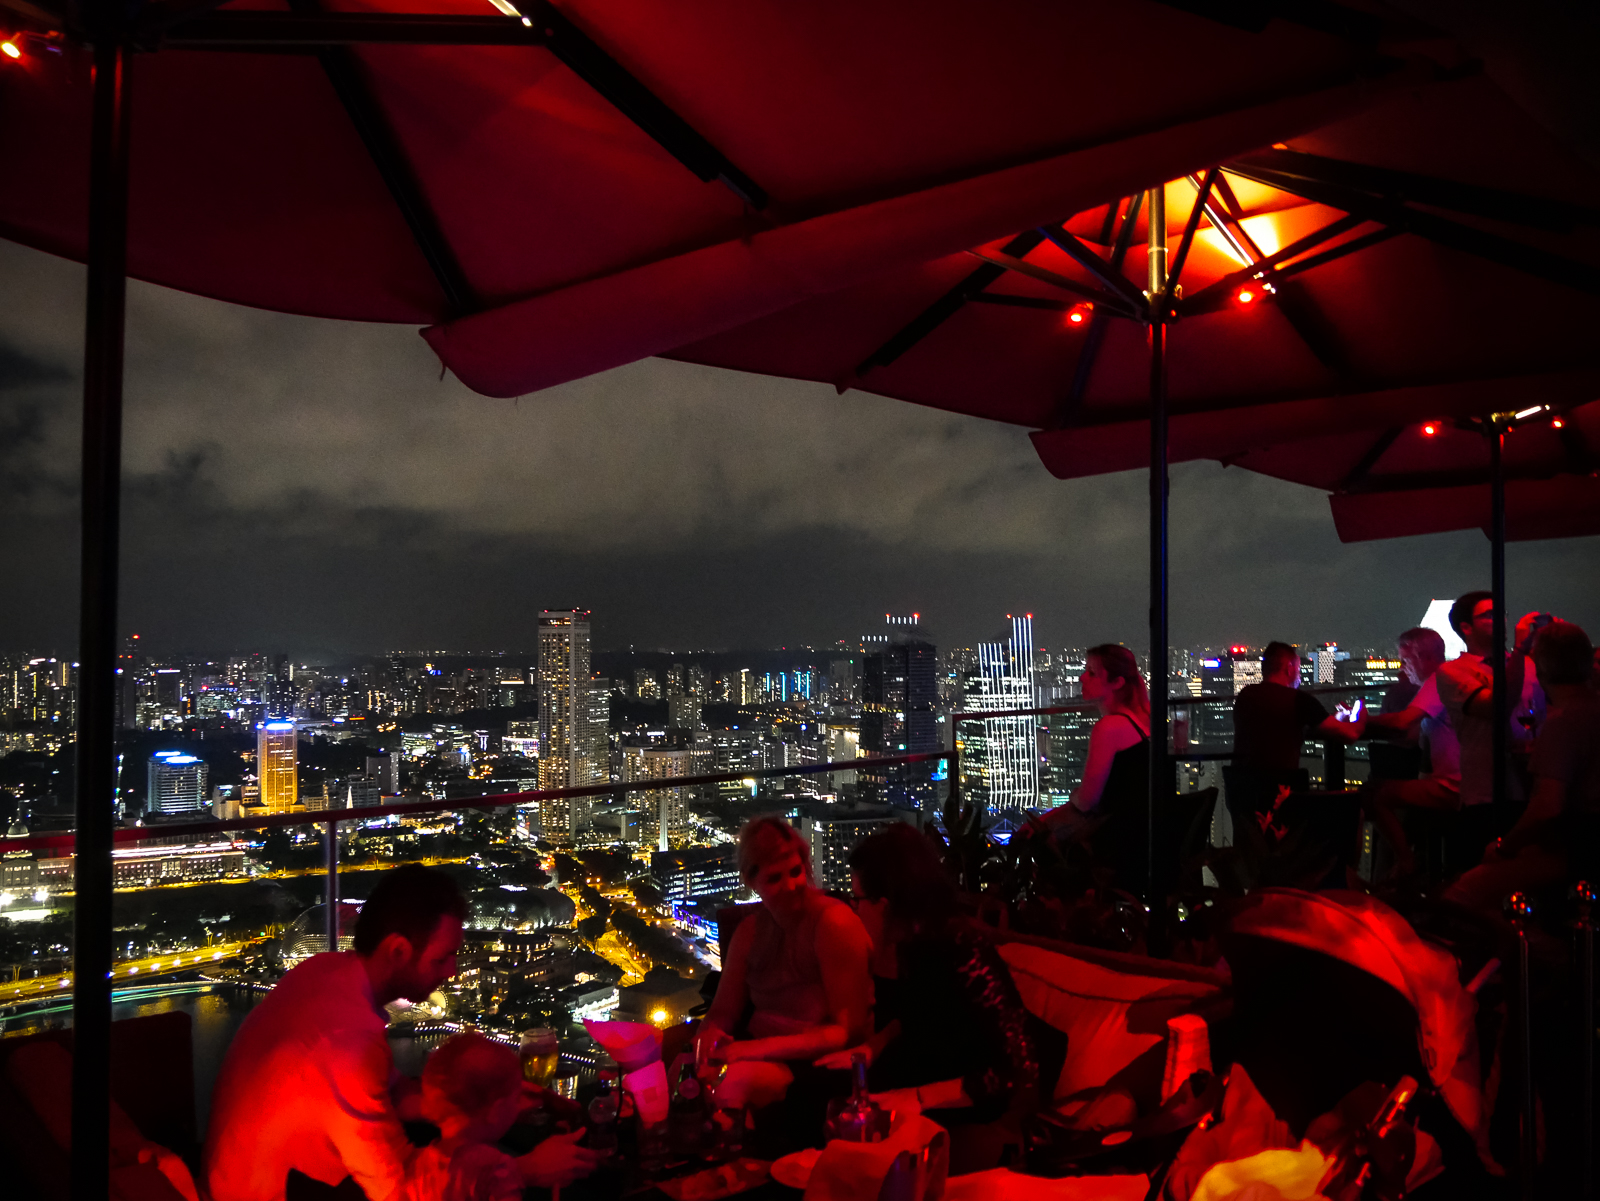 Rooftop bar Ce La Vie at the top of the Marina Bay Sands hotel in Singapore at night on the 57th floor